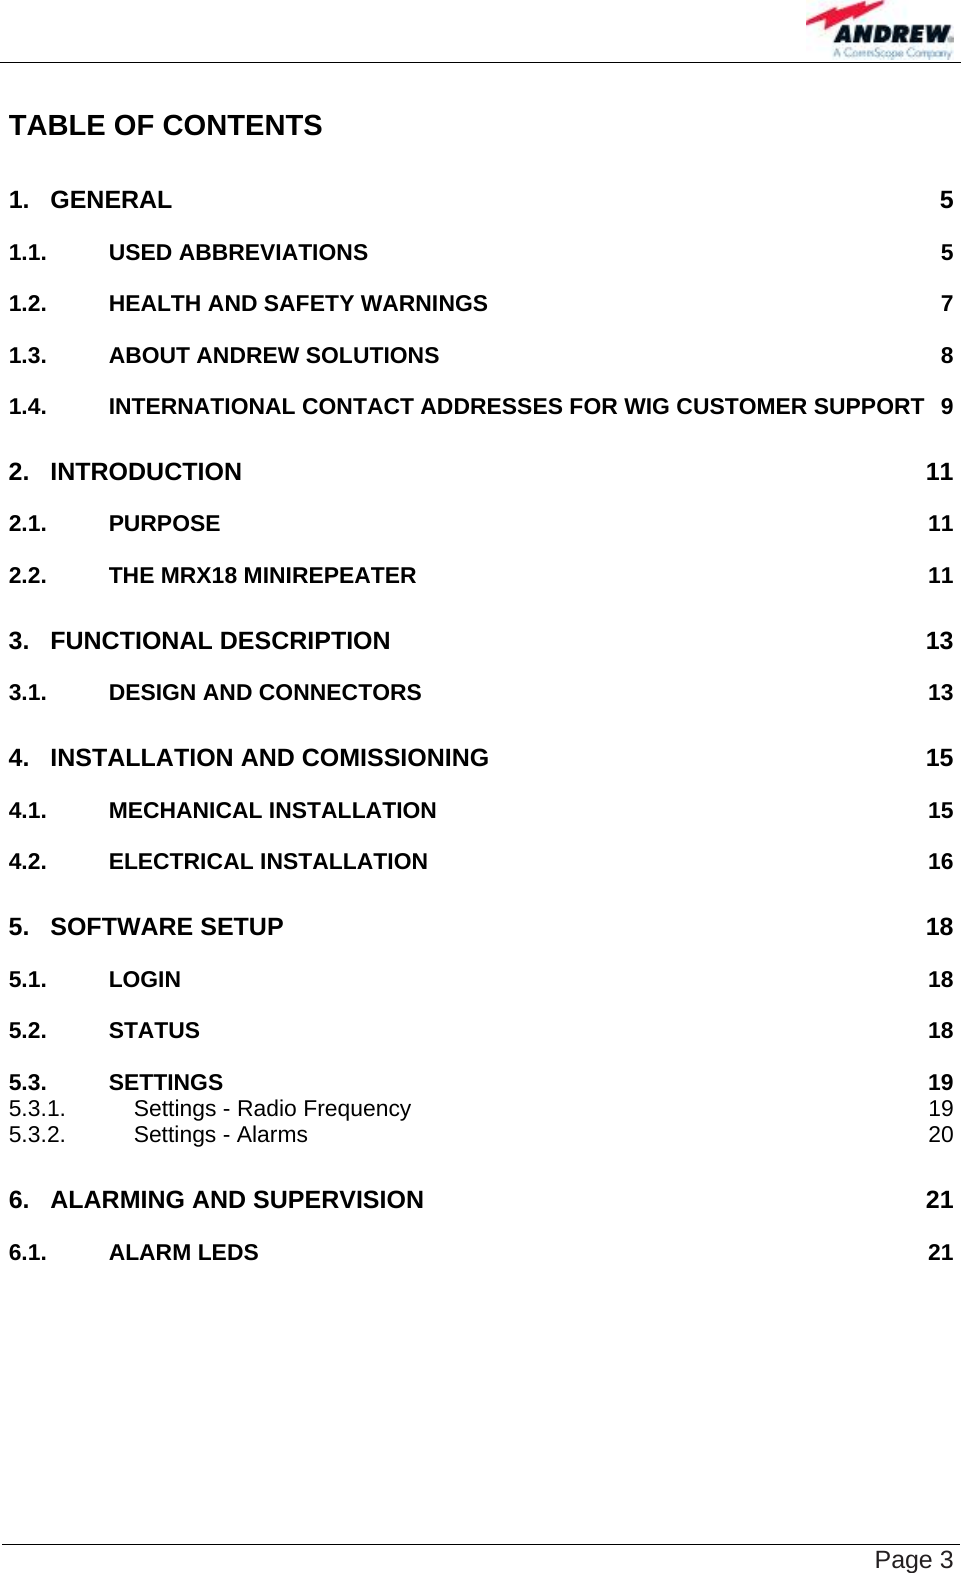    Page 3 TABLE OF CONTENTS 1. GENERAL 5 1.1. USED ABBREVIATIONS 5 1.2. HEALTH AND SAFETY WARNINGS 7 1.3. ABOUT ANDREW SOLUTIONS 8 1.4. INTERNATIONAL CONTACT ADDRESSES FOR WIG CUSTOMER SUPPORT 9 2. INTRODUCTION 11 2.1. PURPOSE 11 2.2. THE MRX18 MINIREPEATER 11 3. FUNCTIONAL DESCRIPTION 13 3.1. DESIGN AND CONNECTORS 13 4. INSTALLATION AND COMISSIONING 15 4.1. MECHANICAL INSTALLATION 15 4.2. ELECTRICAL INSTALLATION 16 5. SOFTWARE SETUP 18 5.1. LOGIN 18 5.2. STATUS 18 5.3. SETTINGS 19 5.3.1. Settings - Radio Frequency 19 5.3.2. Settings - Alarms 20 6. ALARMING AND SUPERVISION 21 6.1. ALARM LEDS 21  